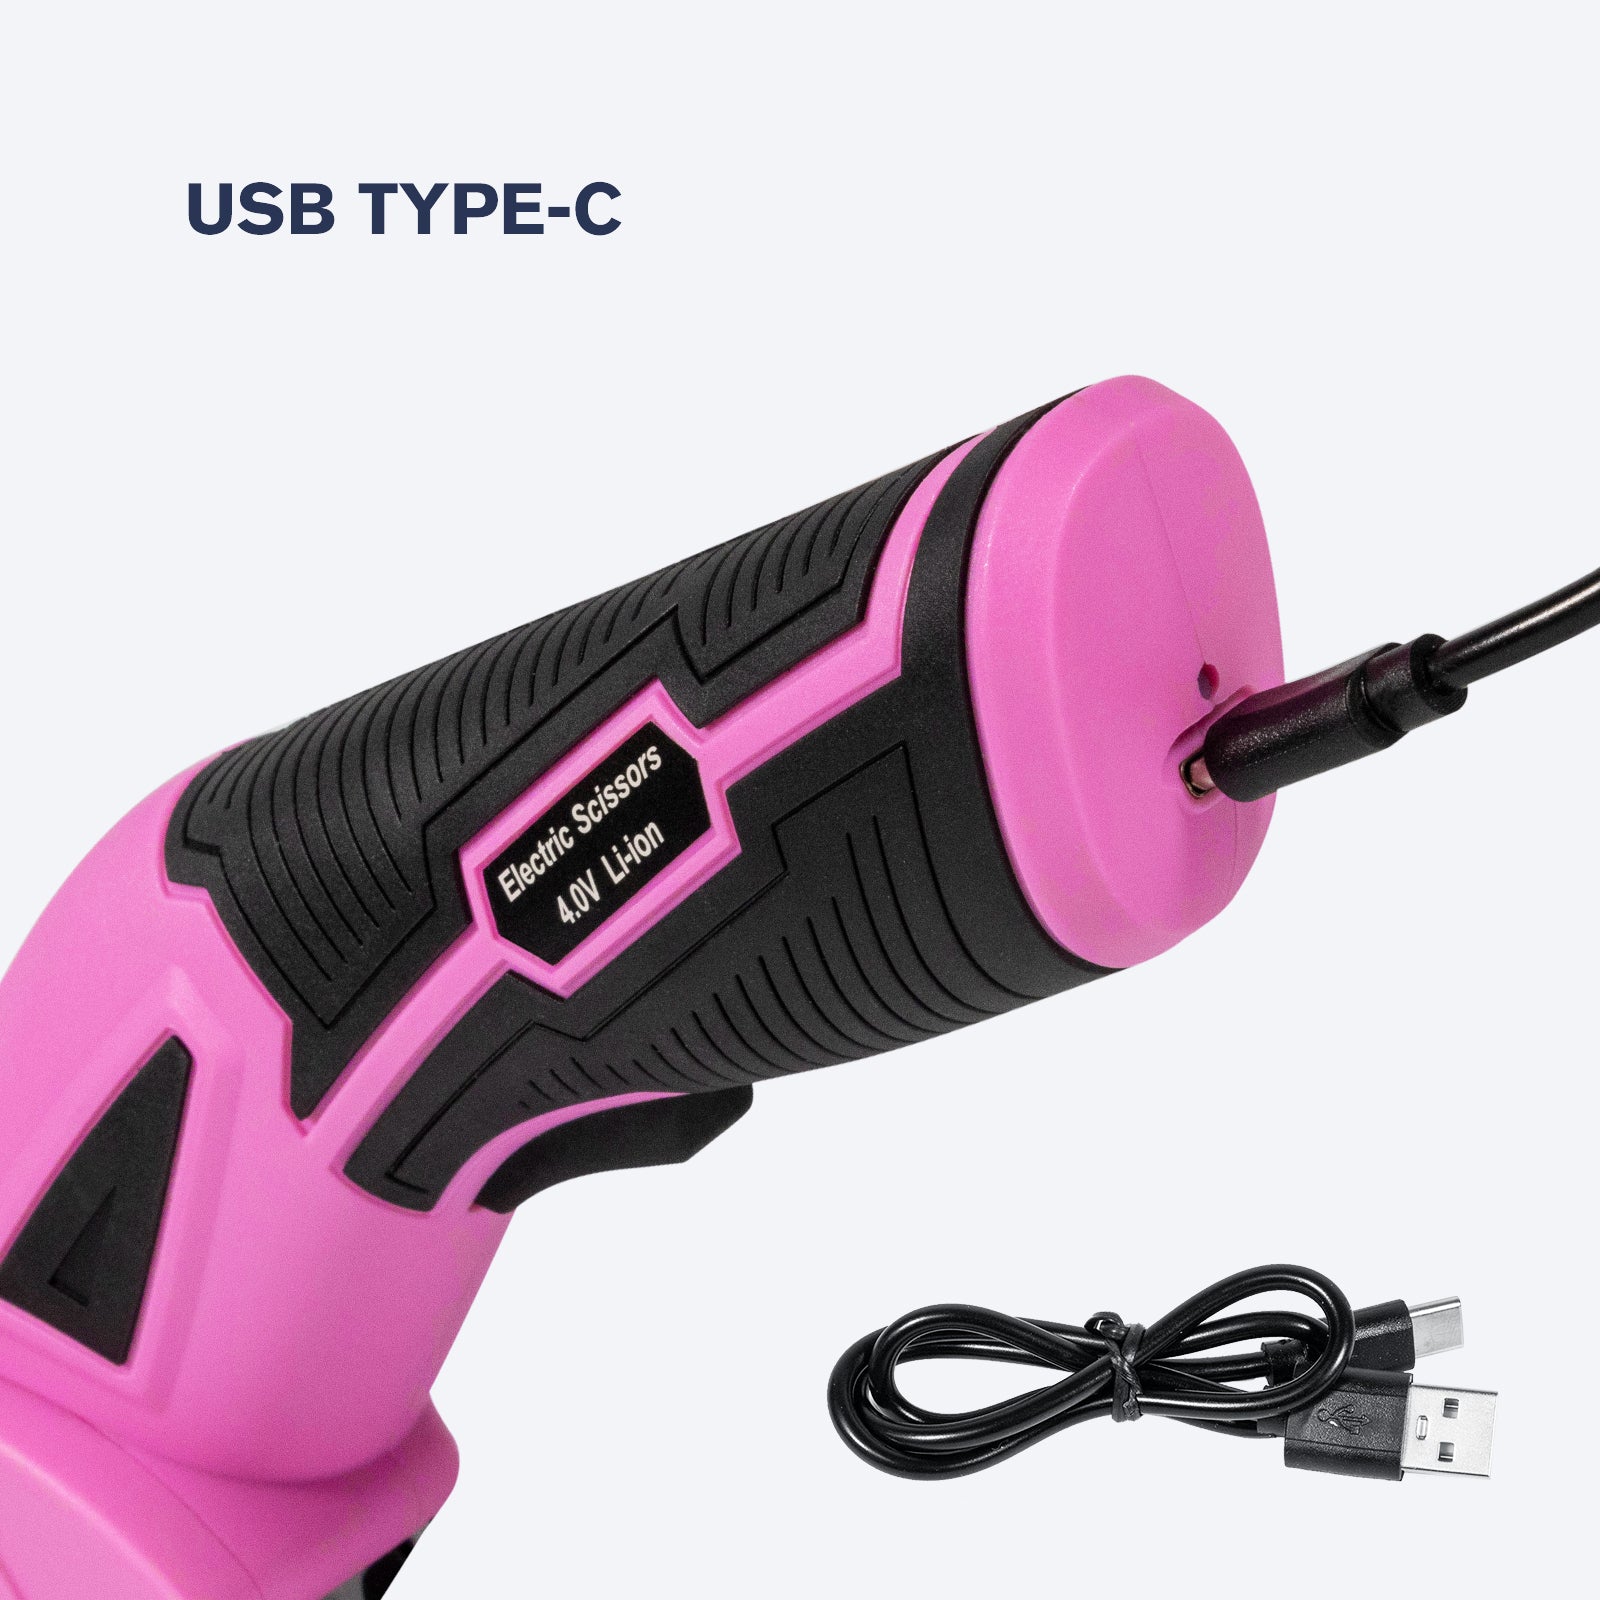 Portable Leather Usb For Tool Cutter Cutter Cardboard Cutte